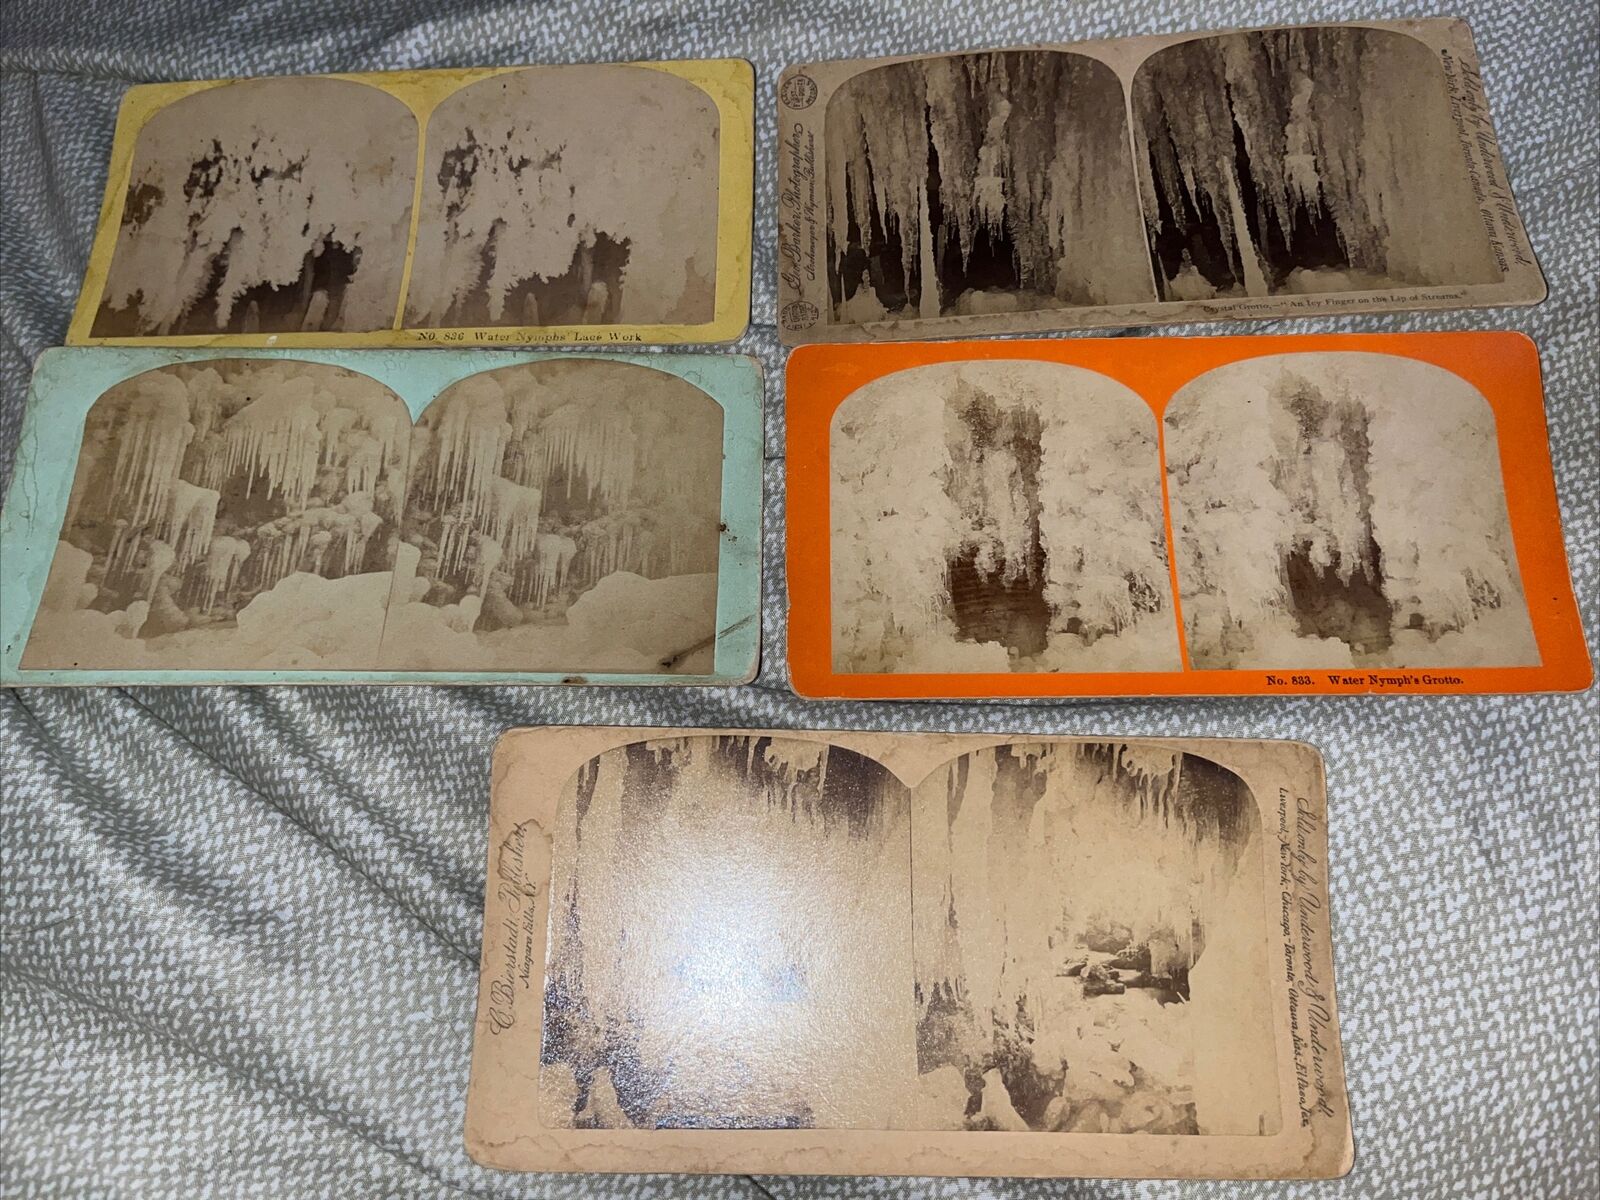 5 Antique Stereoview Card Photos: Water Nymph’s Grotto Crystal Lace Ice Work